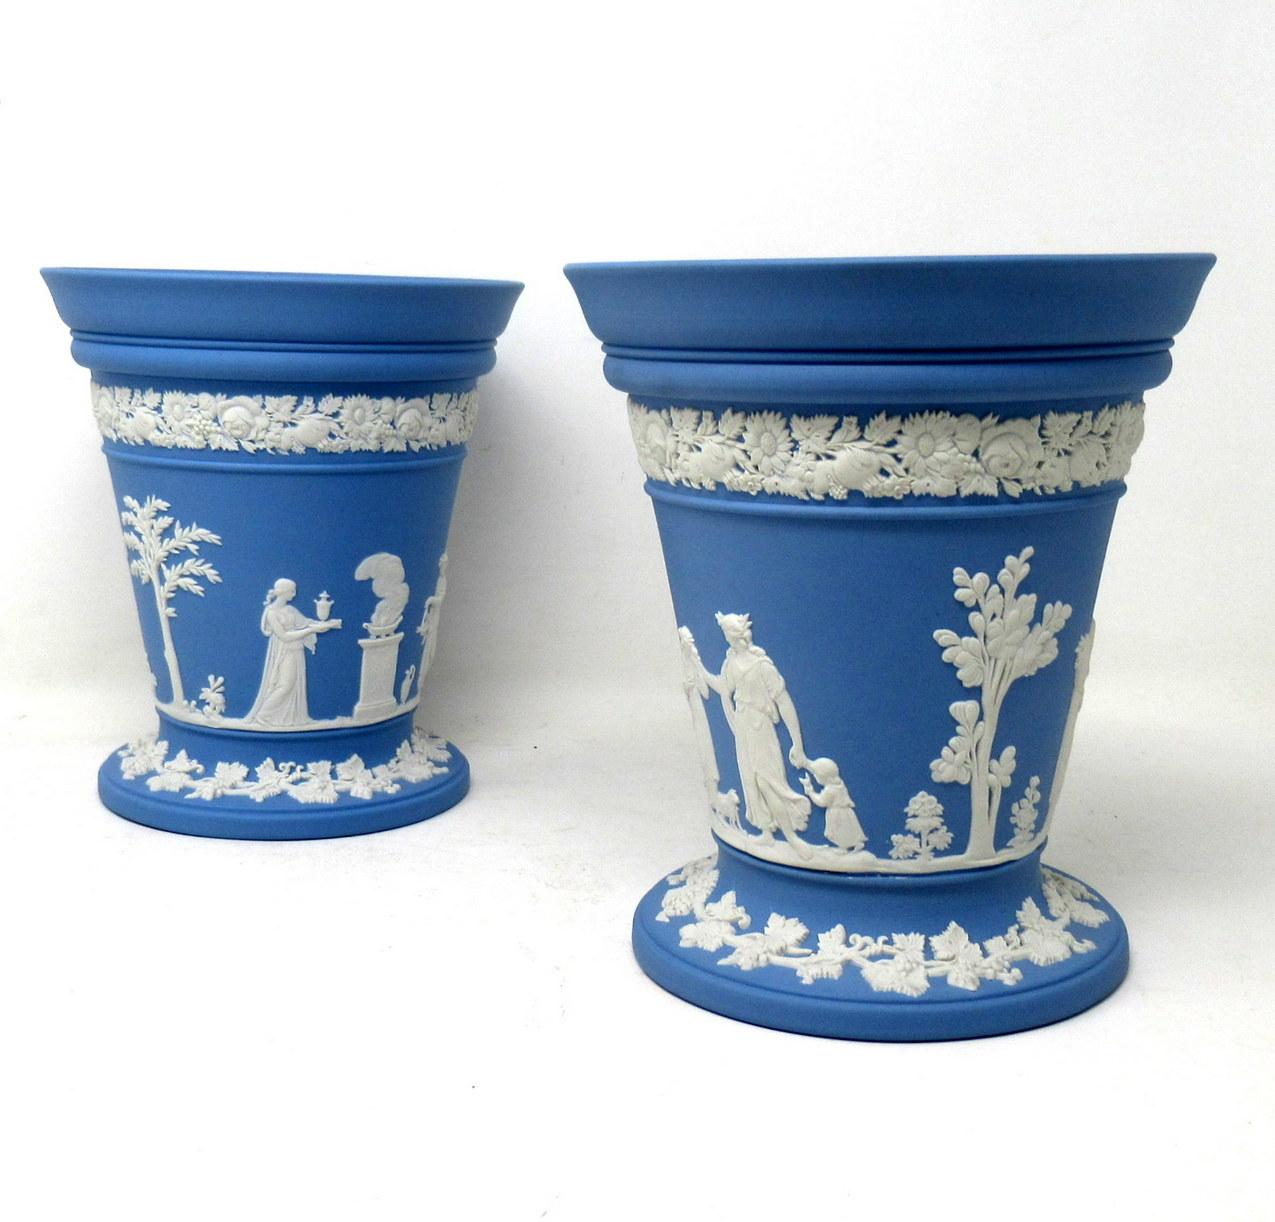 An exceptionally fine example of a pair of English blue jasper ware Wedgwood flower vases of good size proportions and outstanding heavy gauge quality, complete with their original flower receptacles. Mid century, dated 1960s.

Of trumpet form